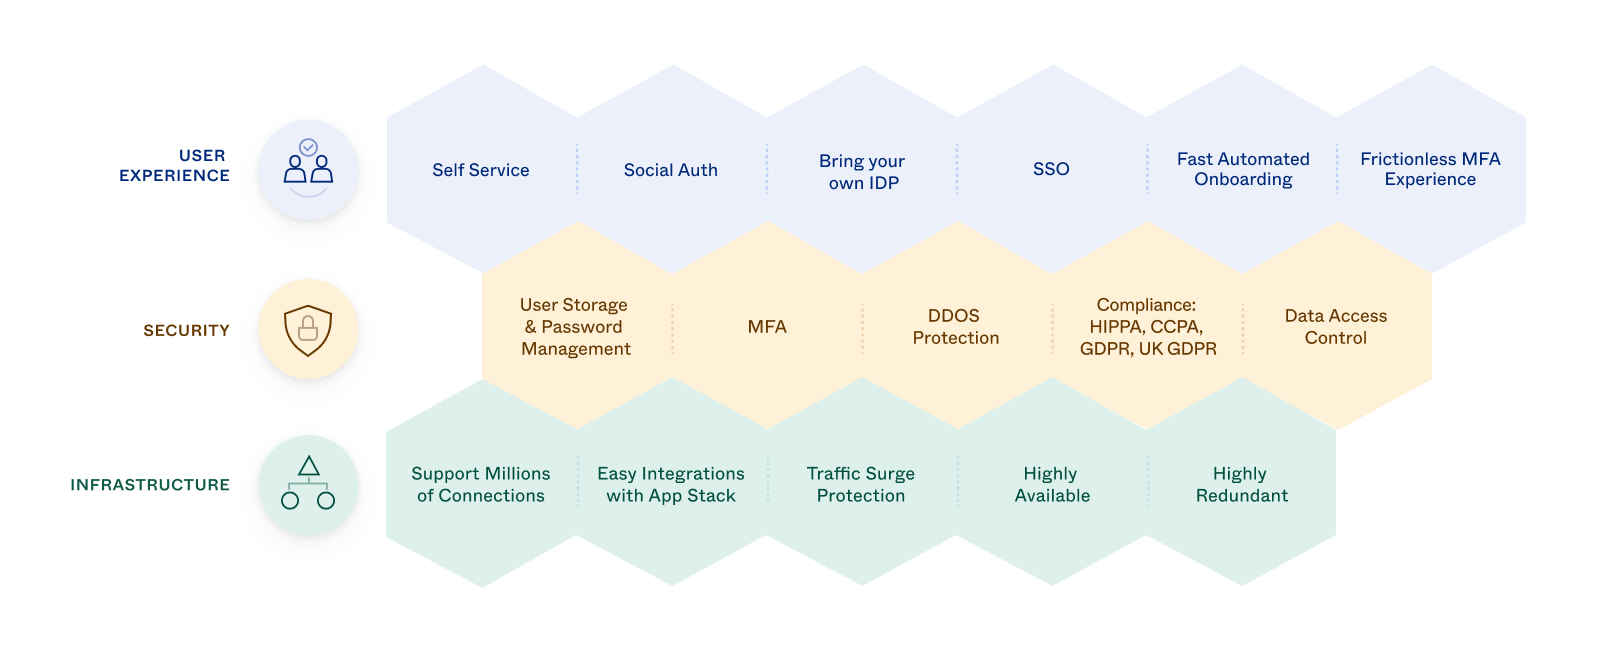 An illustration that shows some of the important components of the user experience, security implementation, and infrastructure of identity and access management solutions.